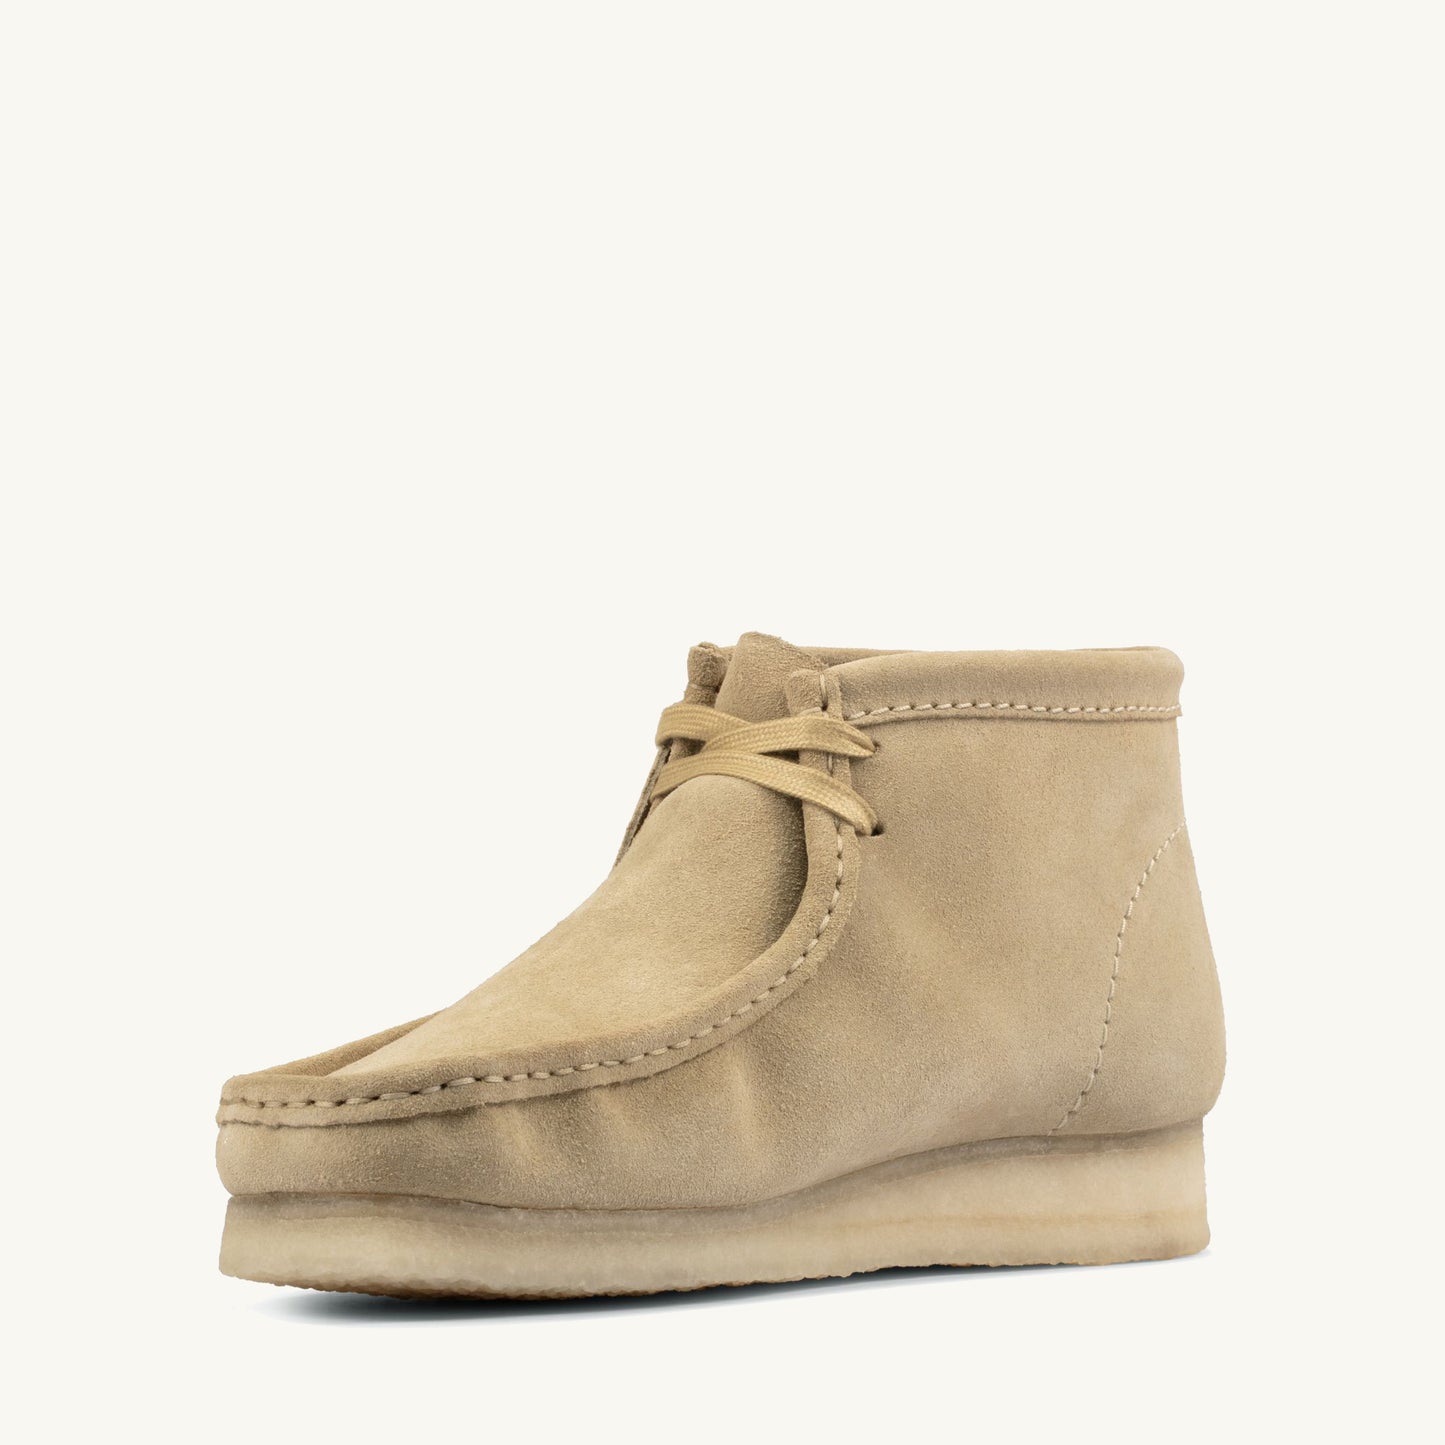 WALLABEE BOOT SUEDE MAPLE